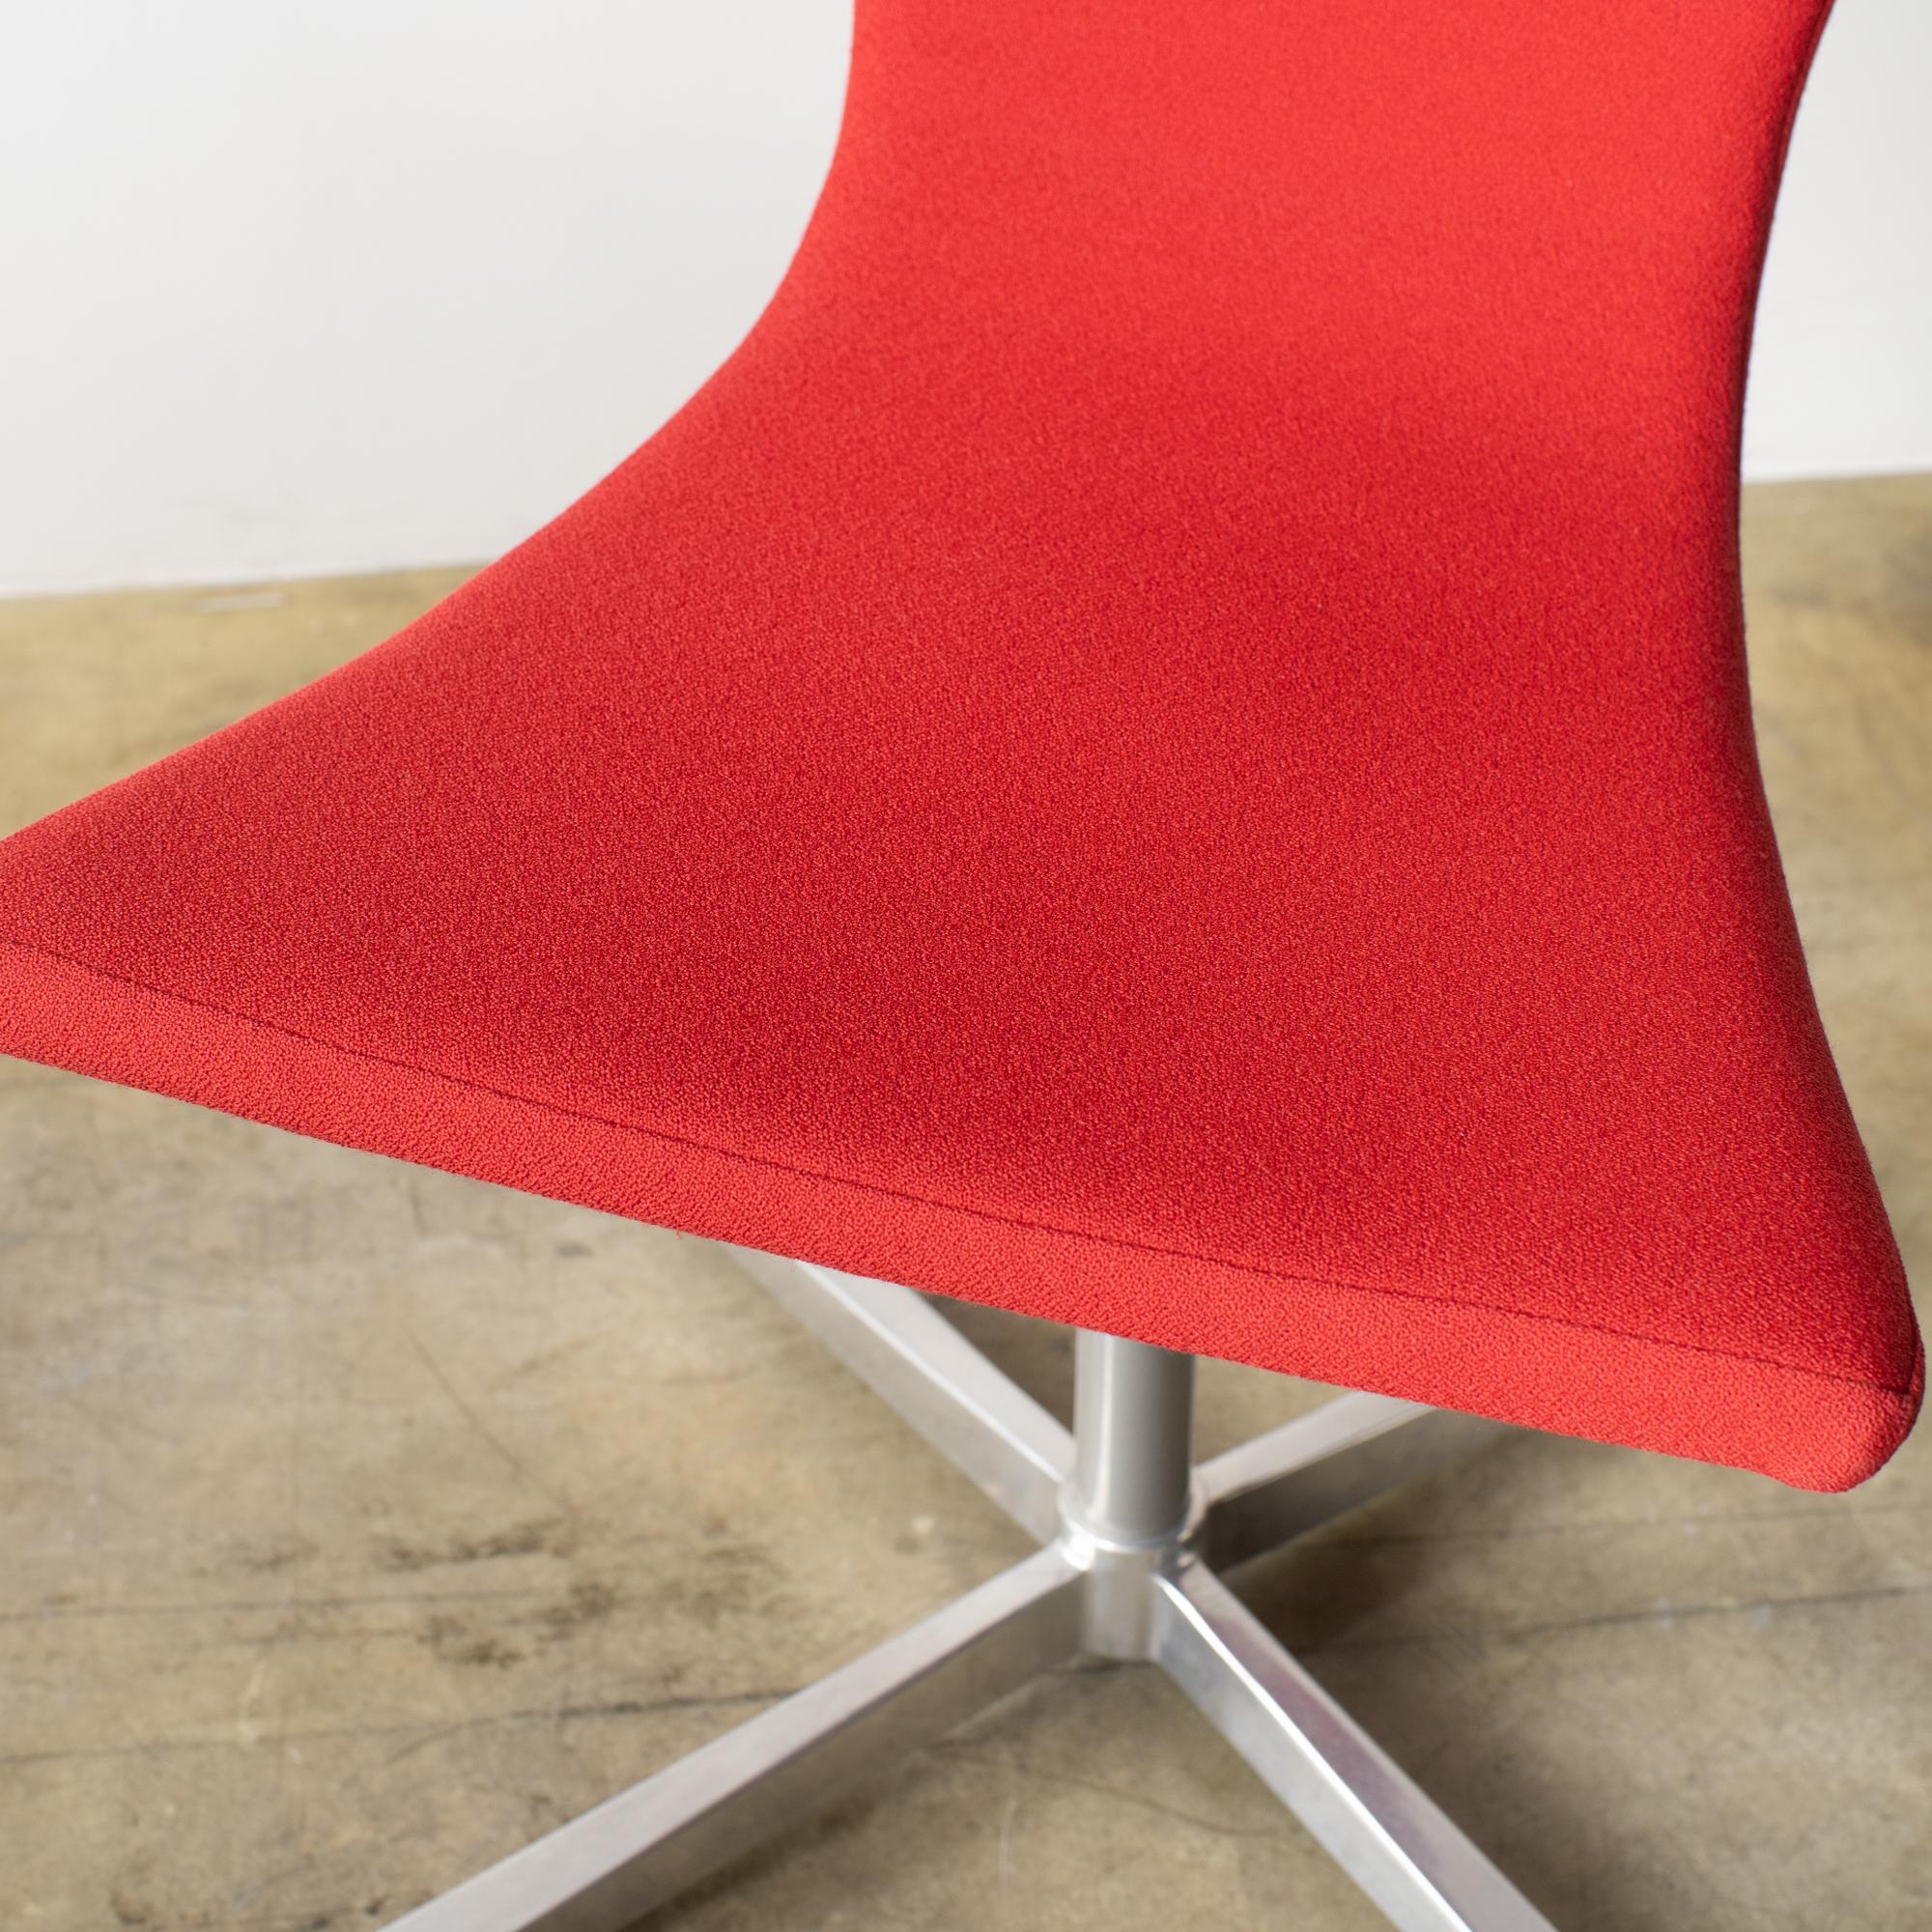 Steel Chair red fabric chair Christian Ghion  Y2K style design space age For Sale